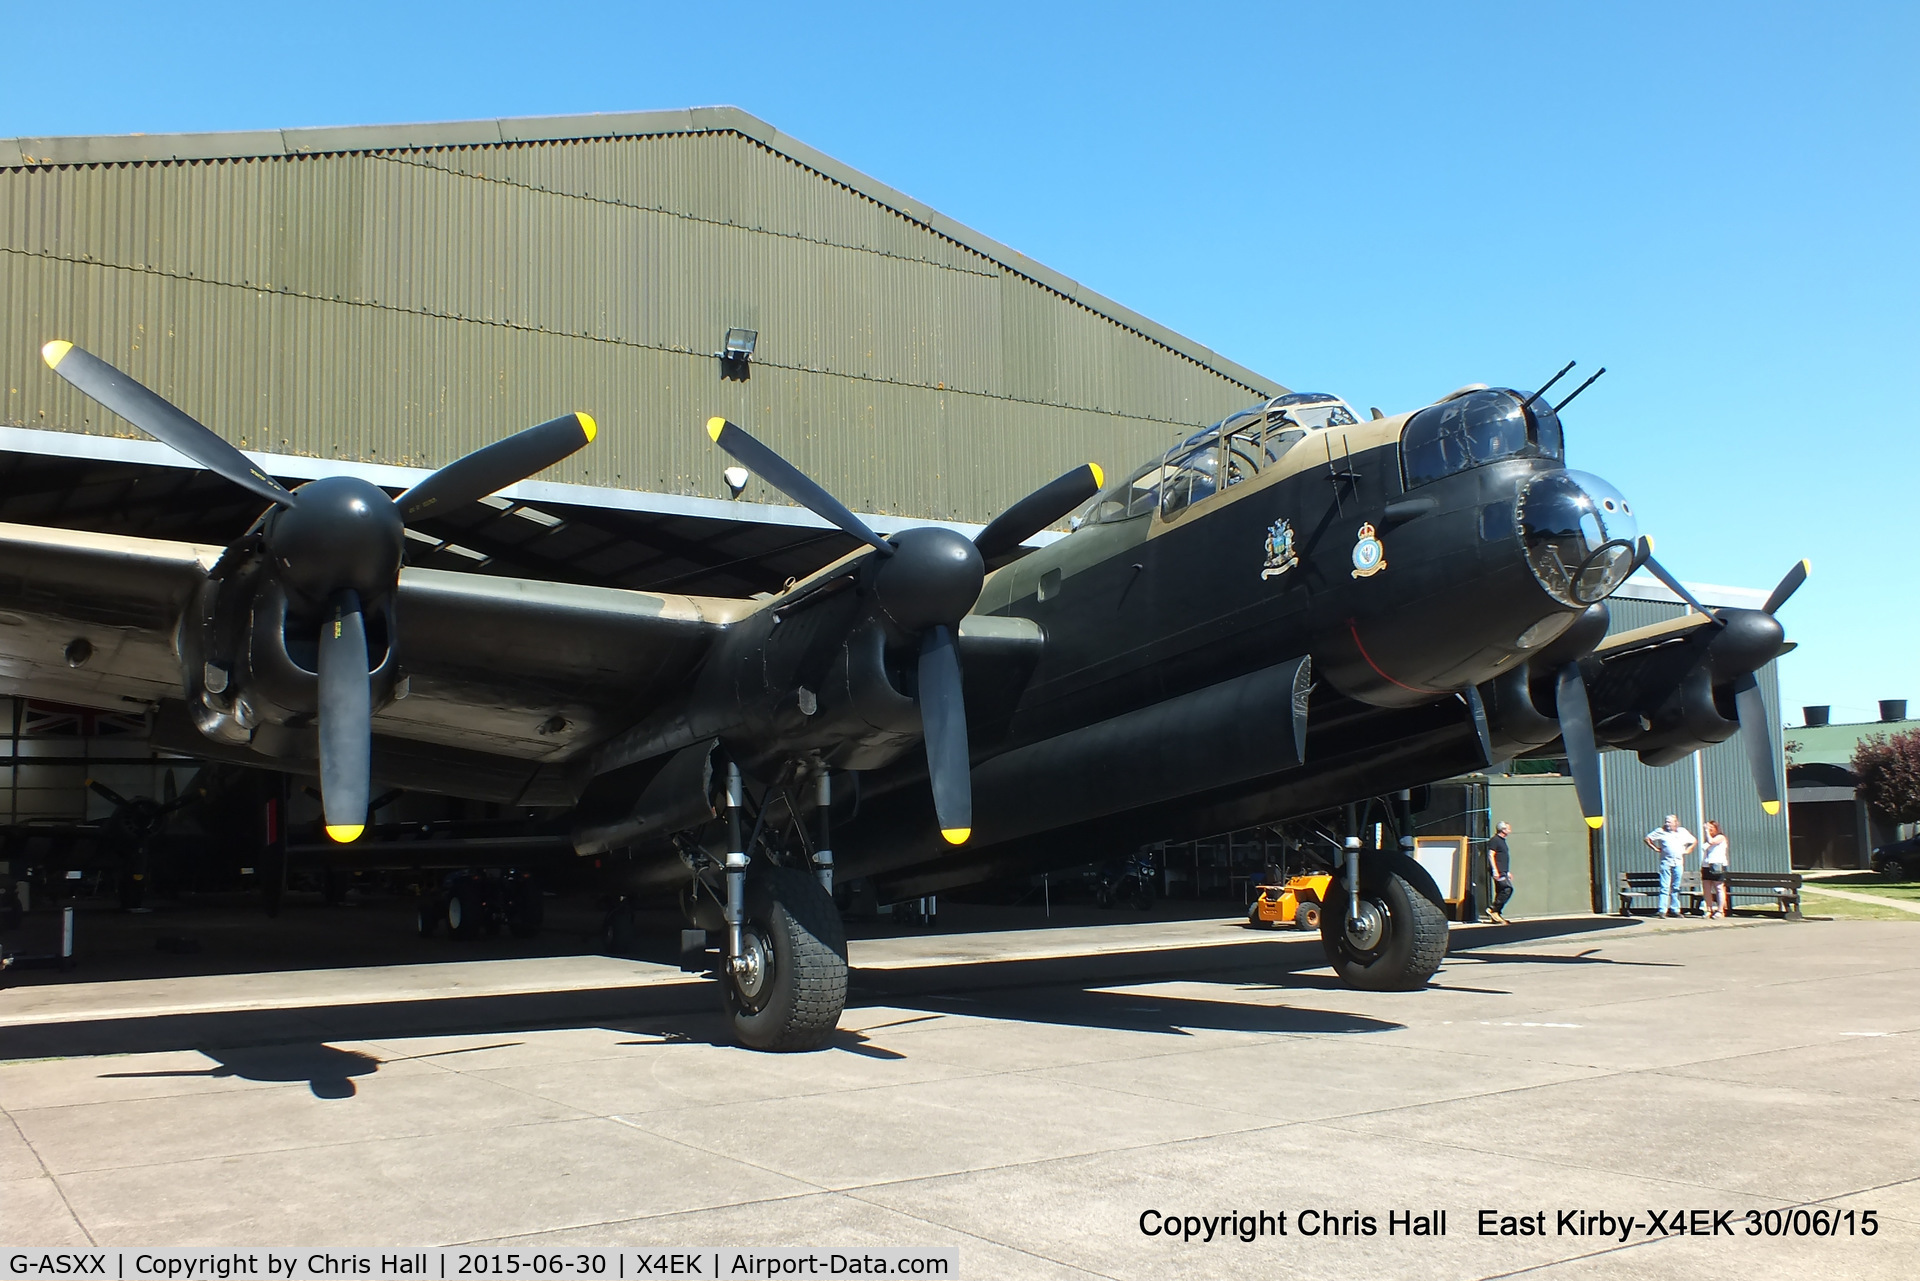 G-ASXX, 1945 Avro 683 Lancaster B7 C/N Not found NX611, at the Lincolnshire Aviation Heritage Centre, RAF East Kirkby